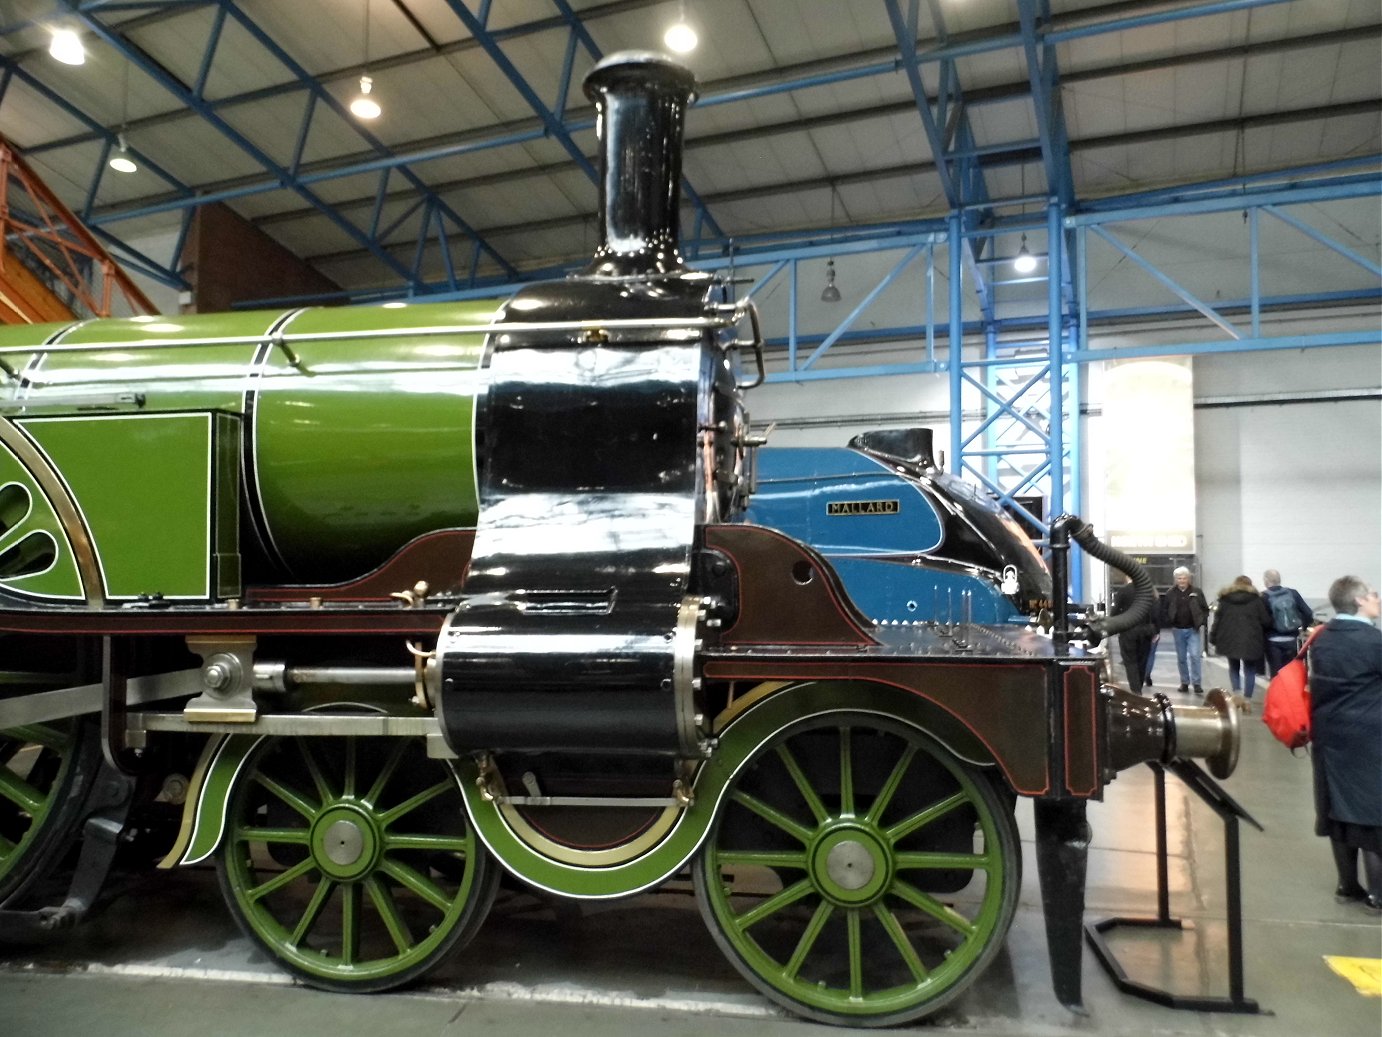 Stirling Single at the National Raiway Museum, Thurs 10/10/2019. 